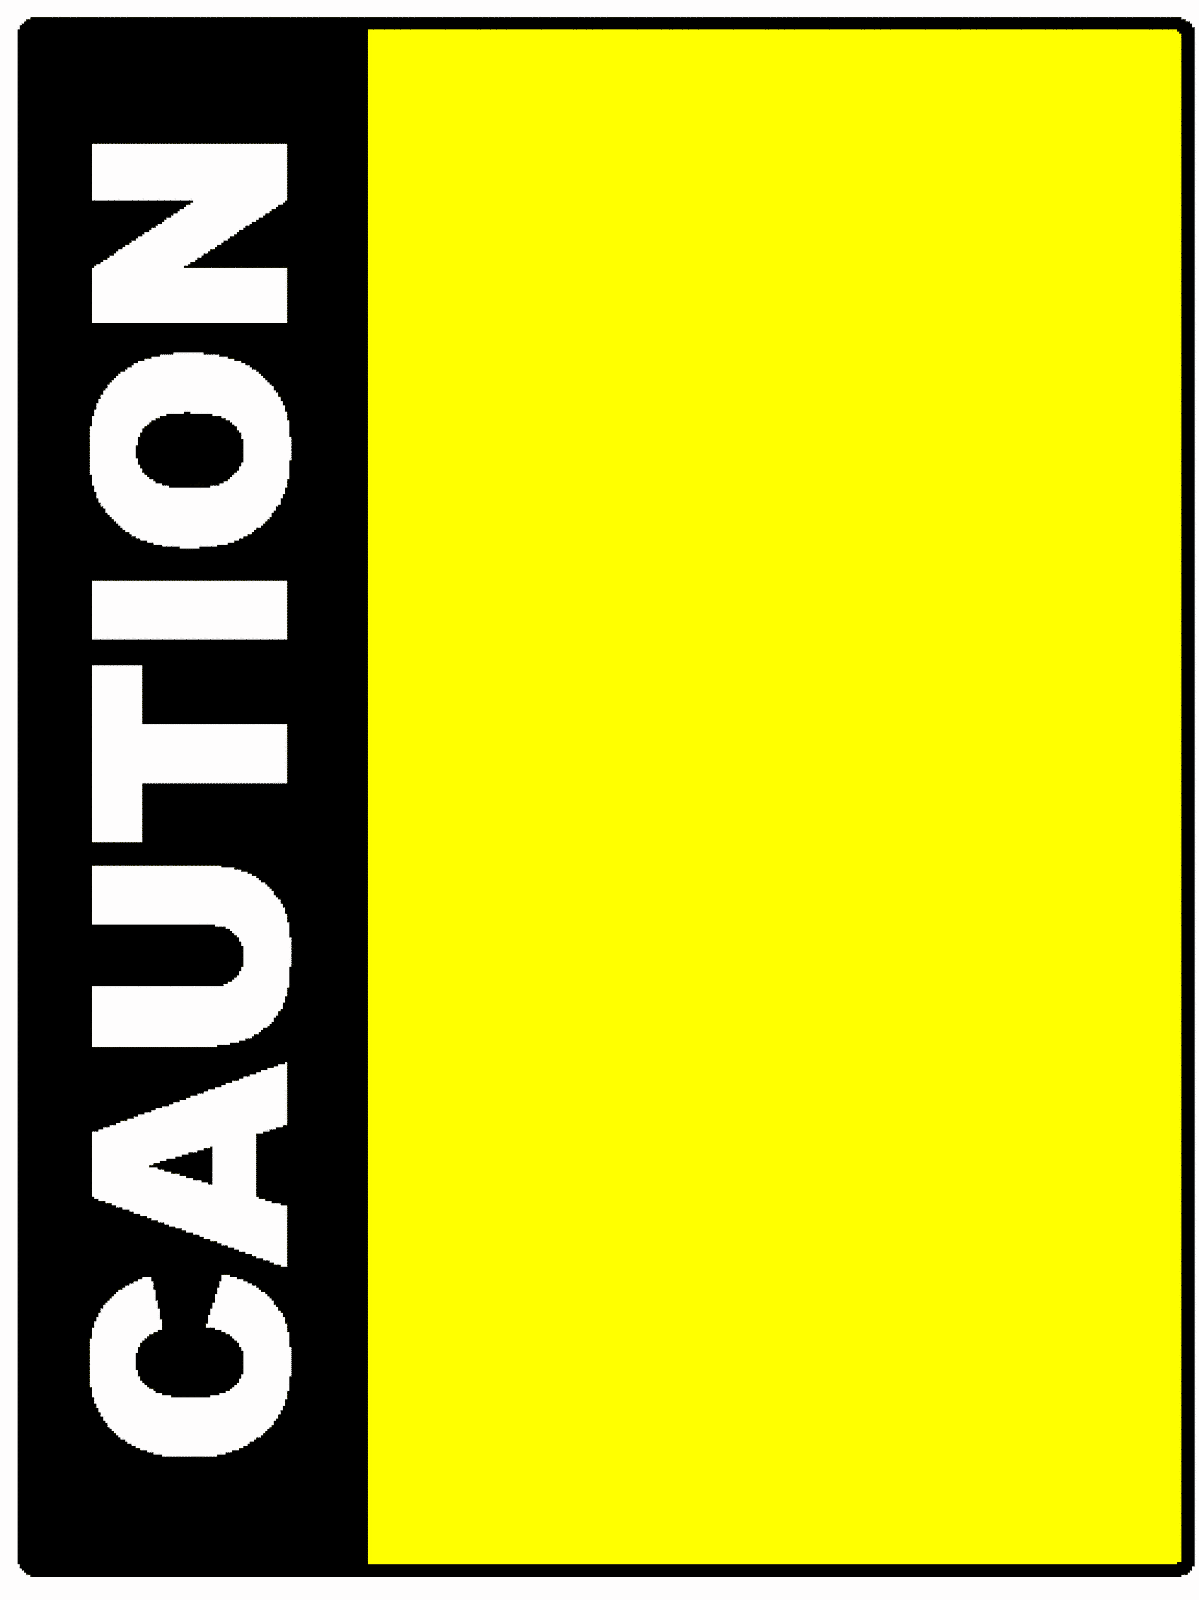 free-caution-tape-border-download-free-caution-tape-border-png-images